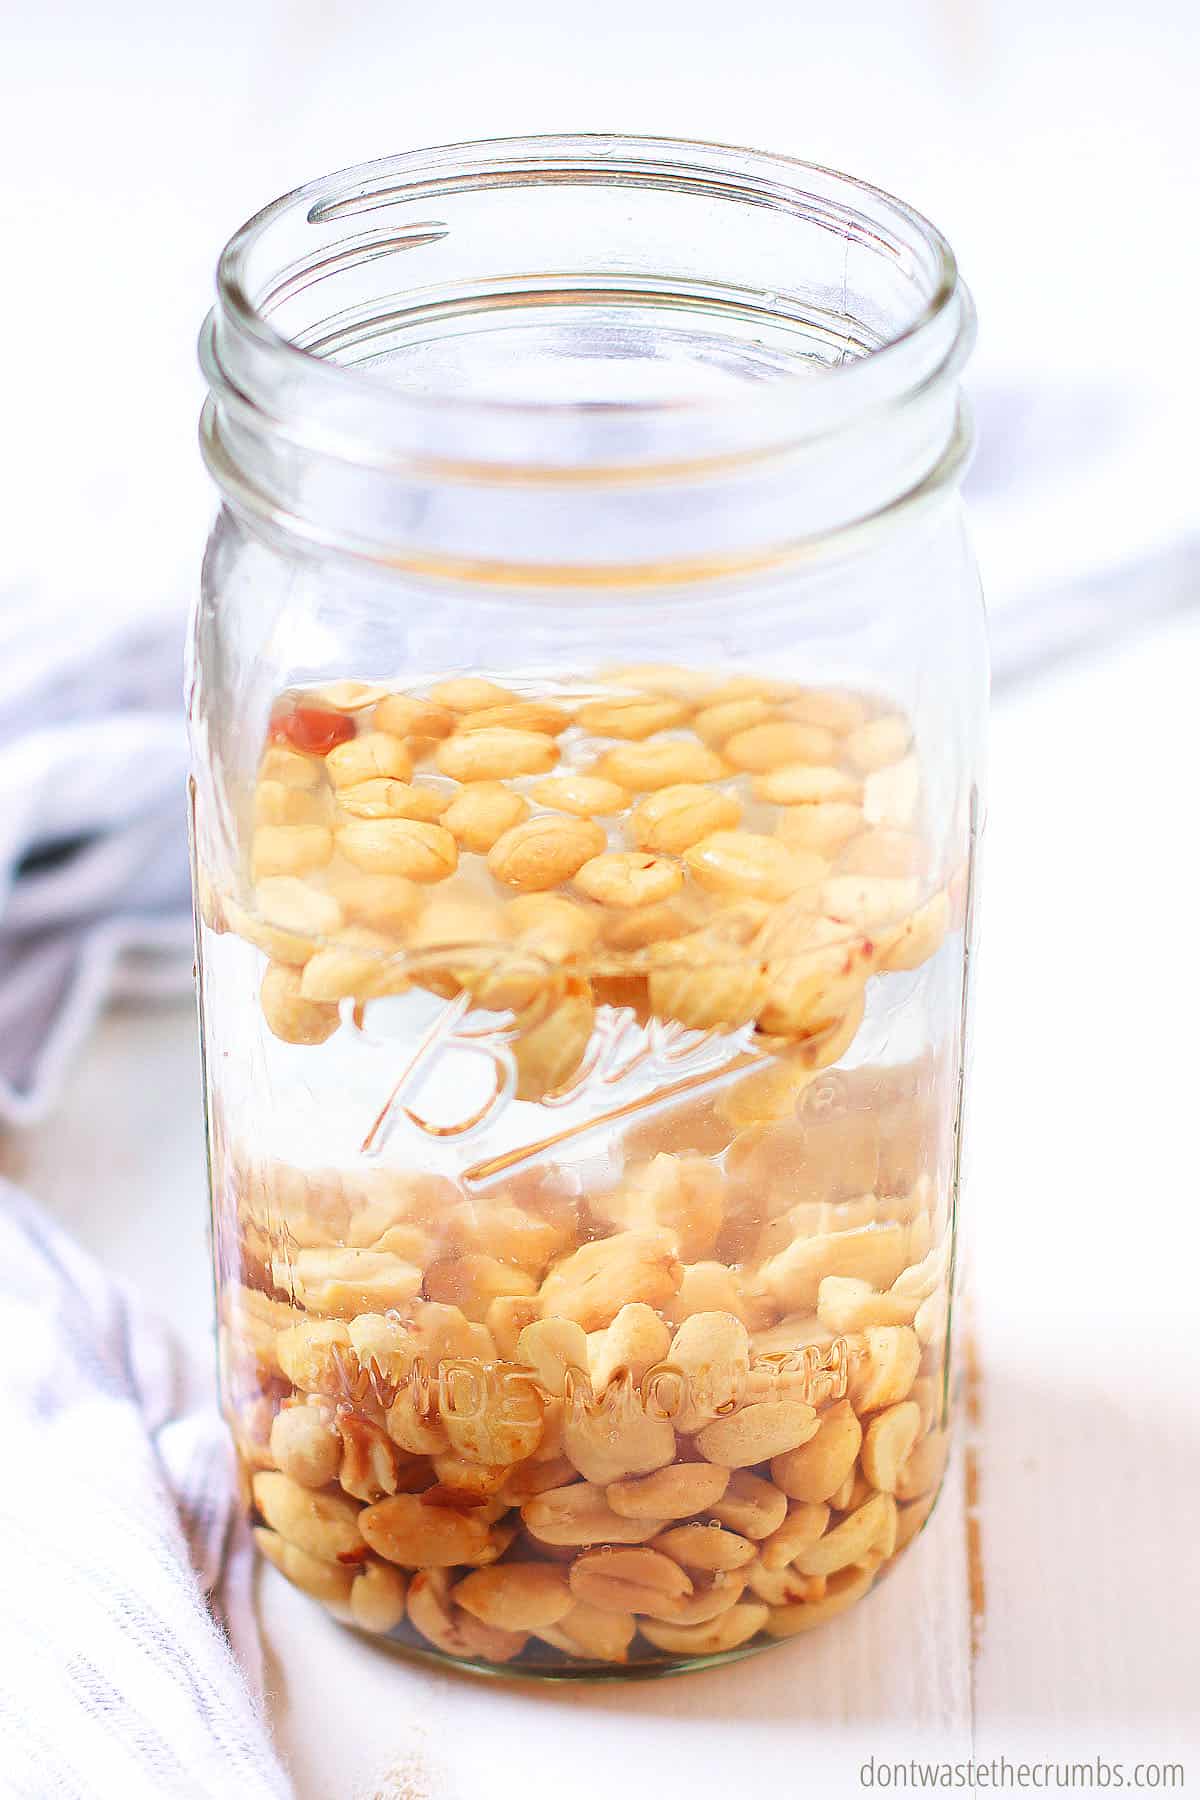 When making peanut milk, soak your peanuts overnight in a glass jar filled with filtered water.